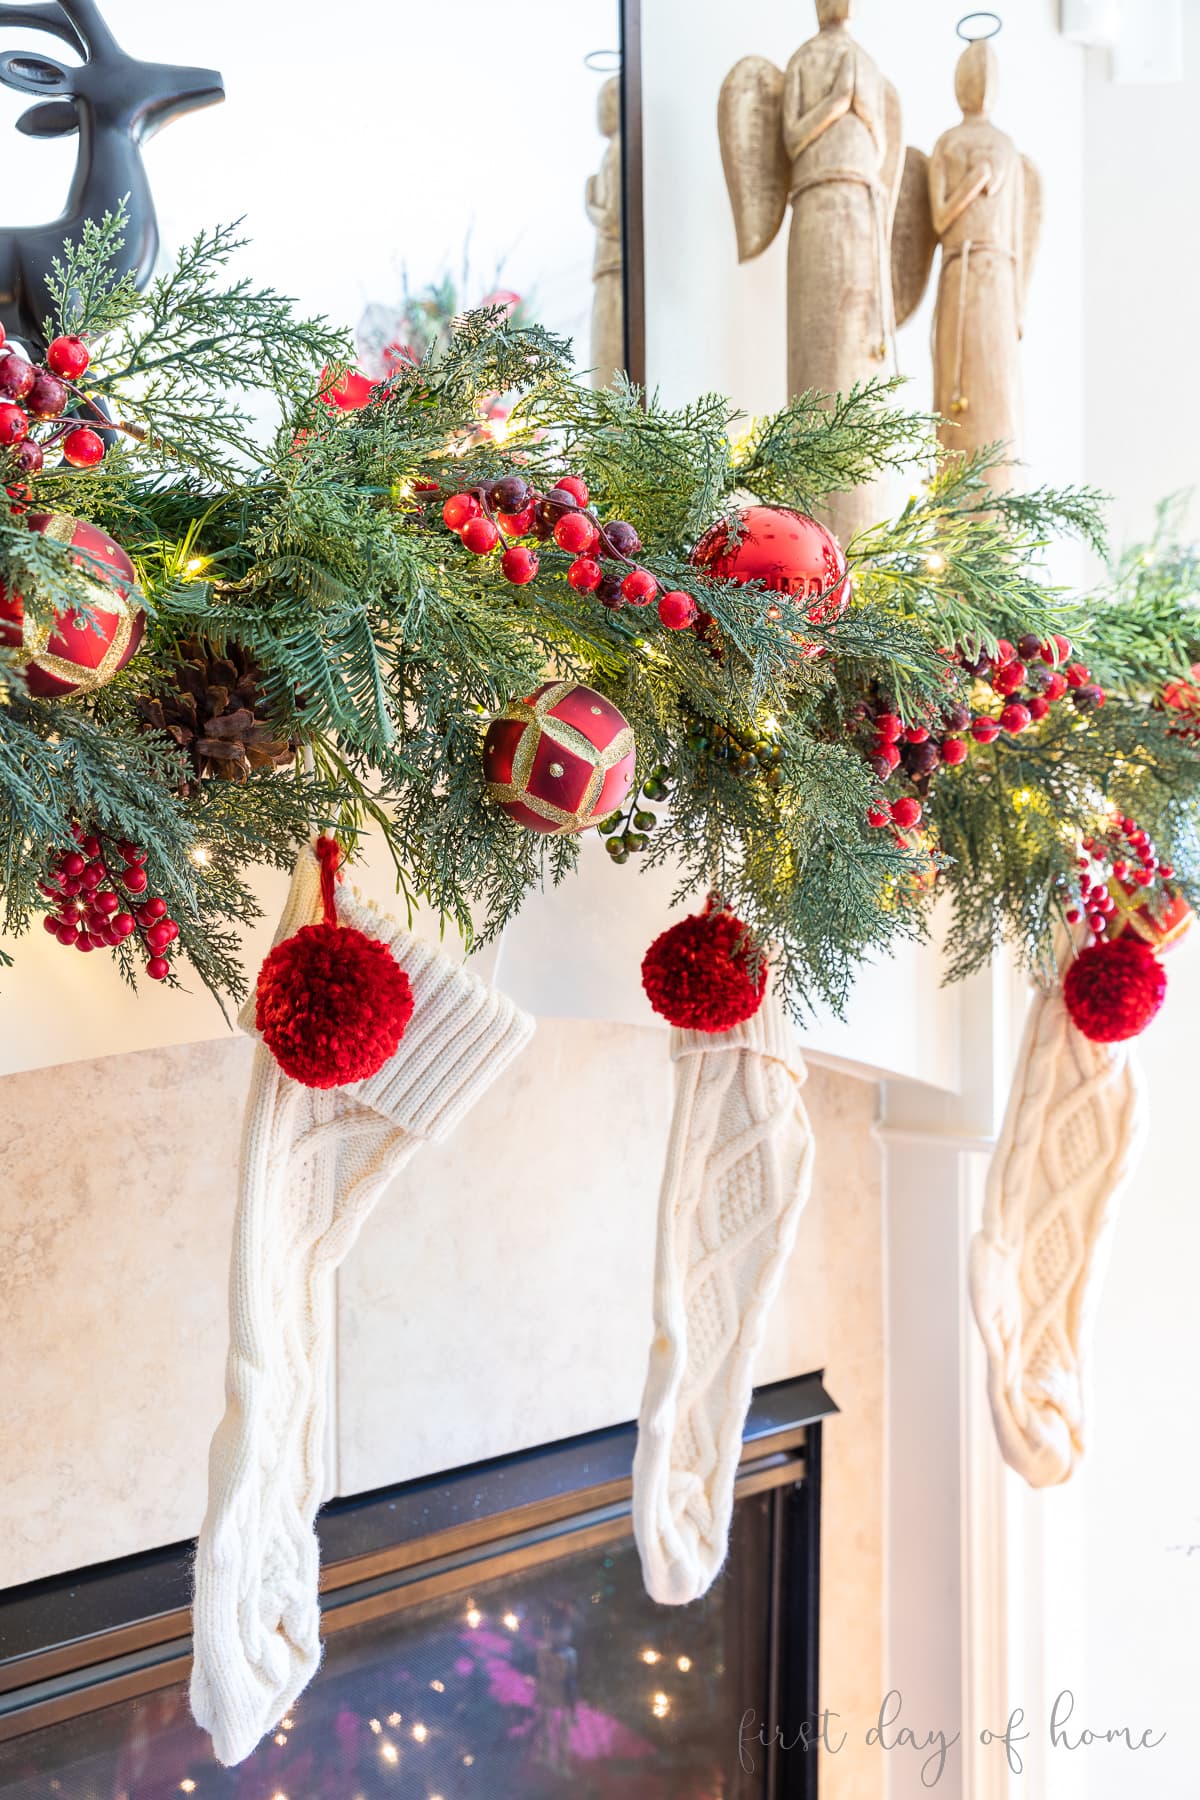 Knit stockings hung from Christmas mantel garland